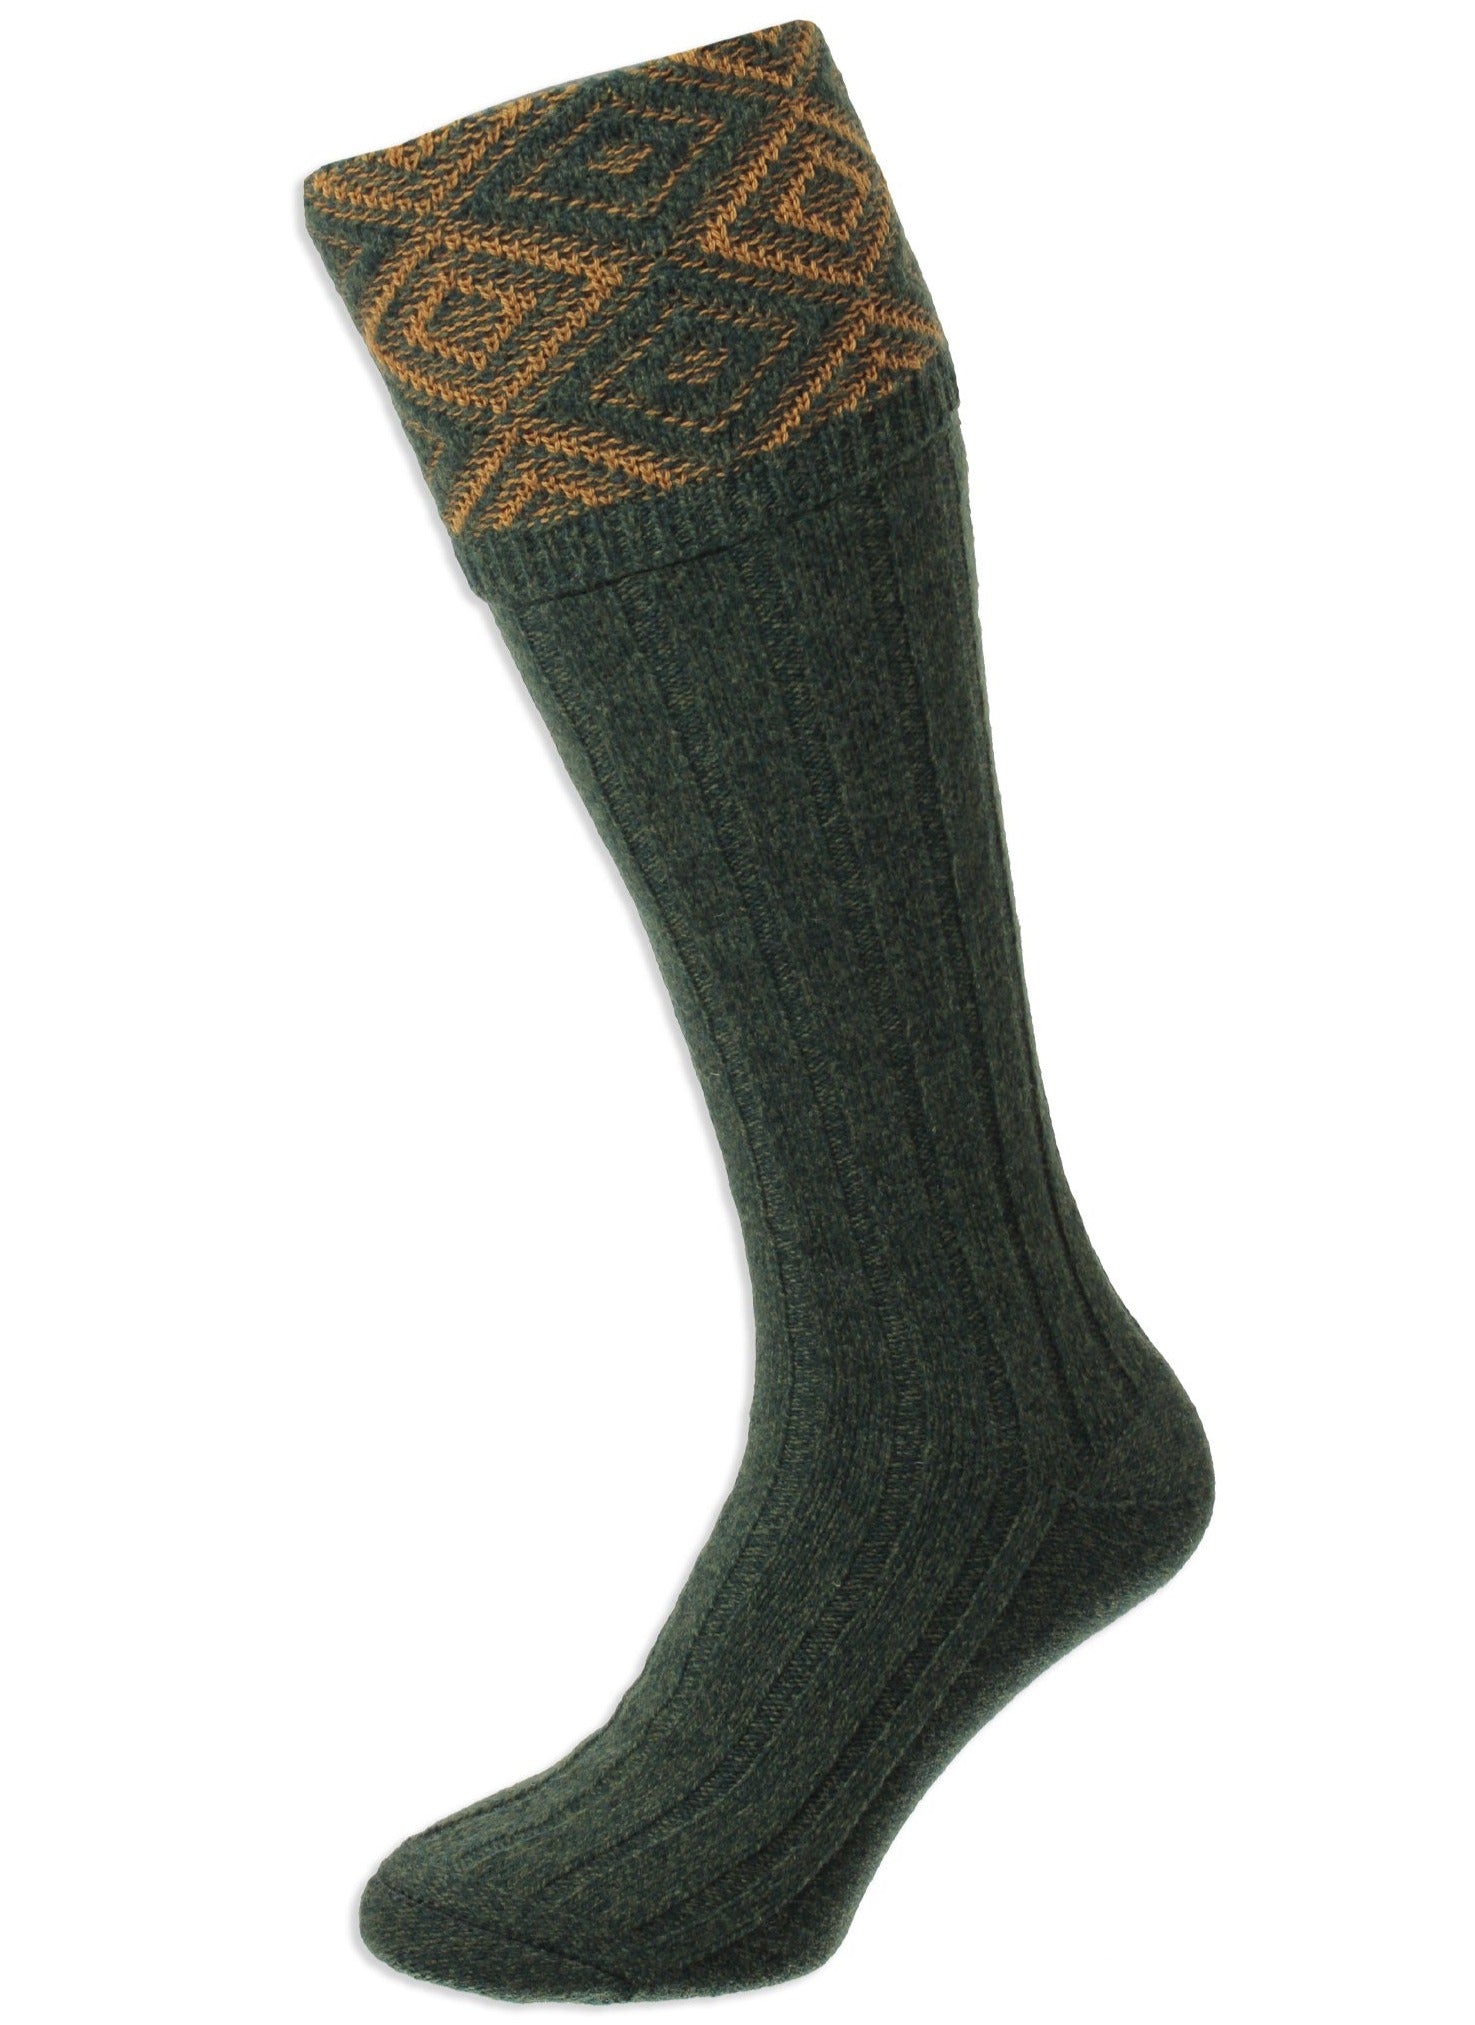 Forest Green Diamond Textured Top Shooting Sock by HJ Hall 